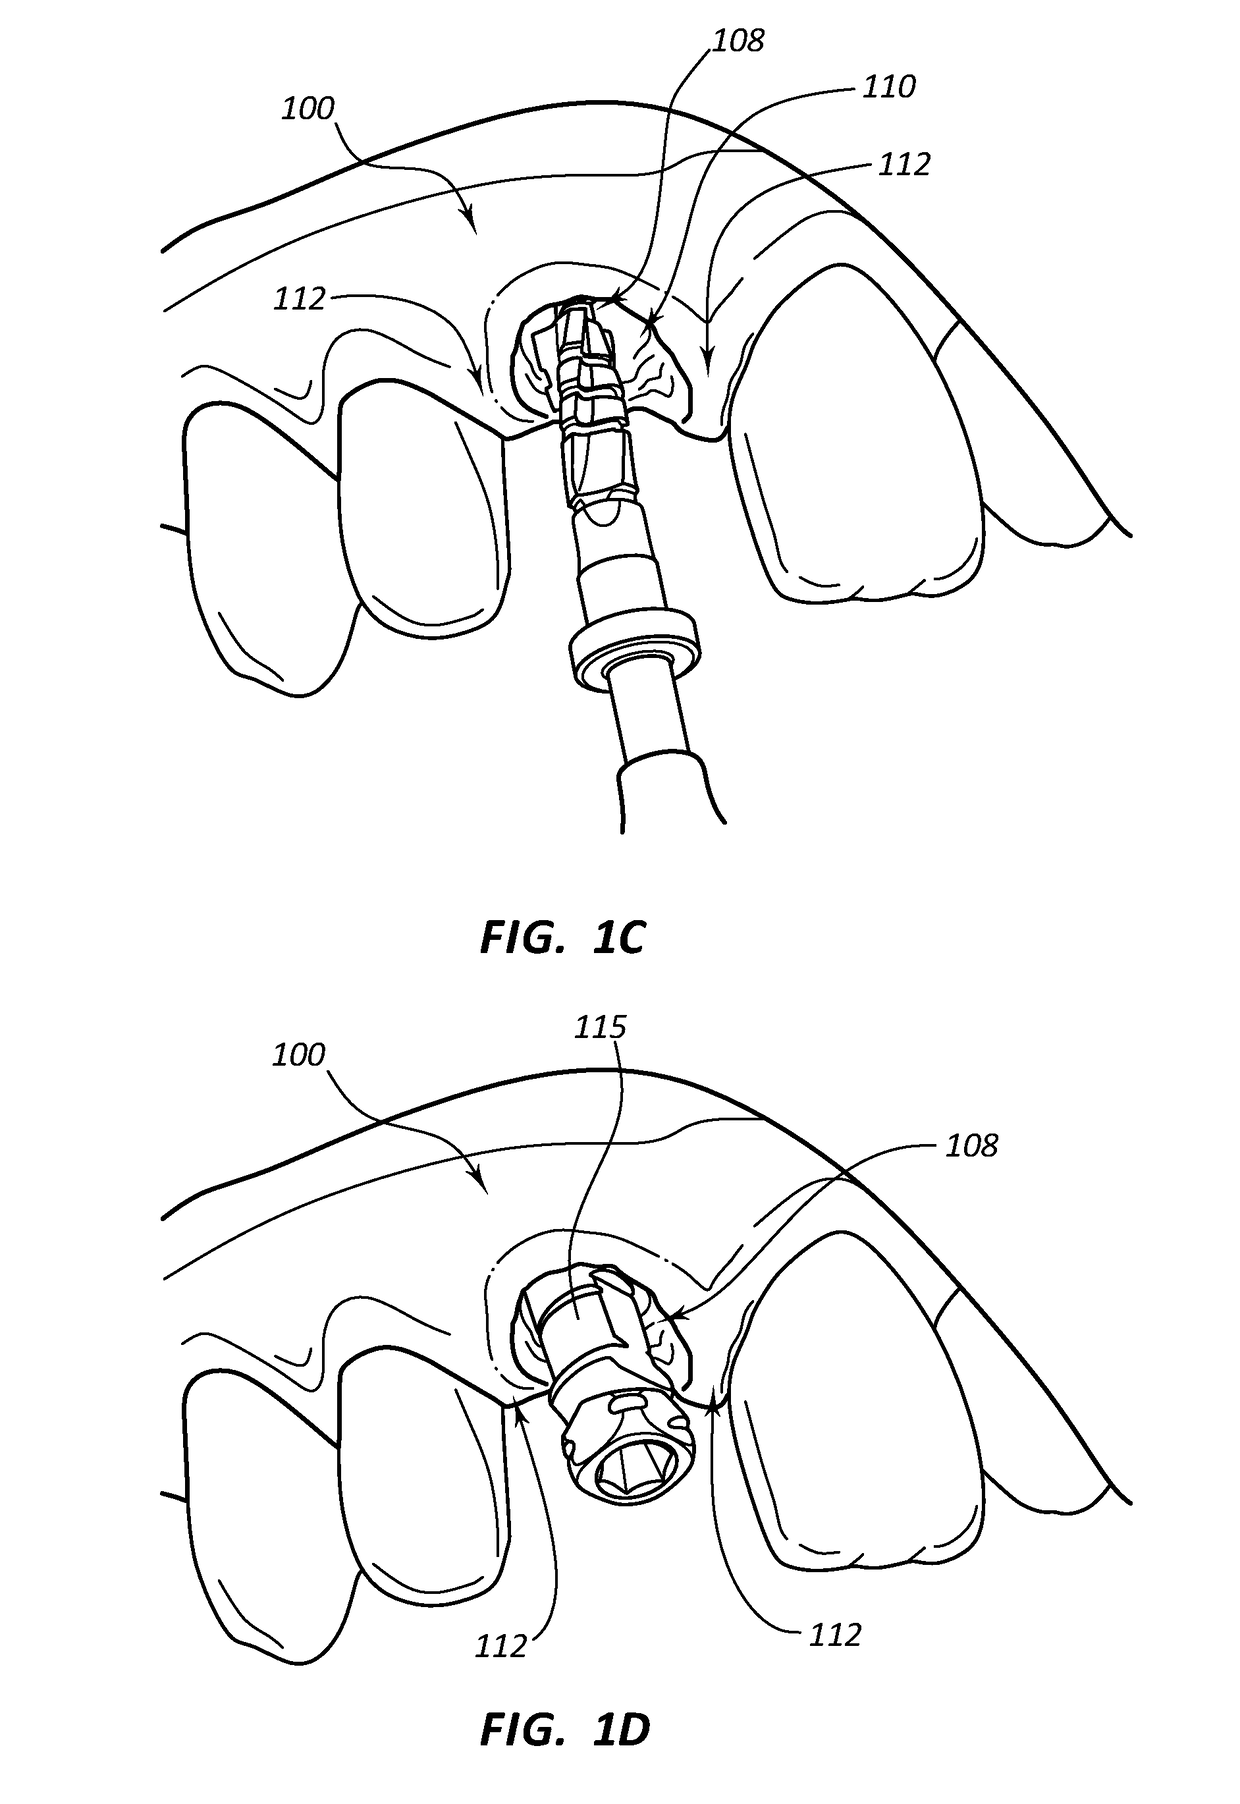 Dental Implants with Markers for Determining Three-Dimensional Positioning